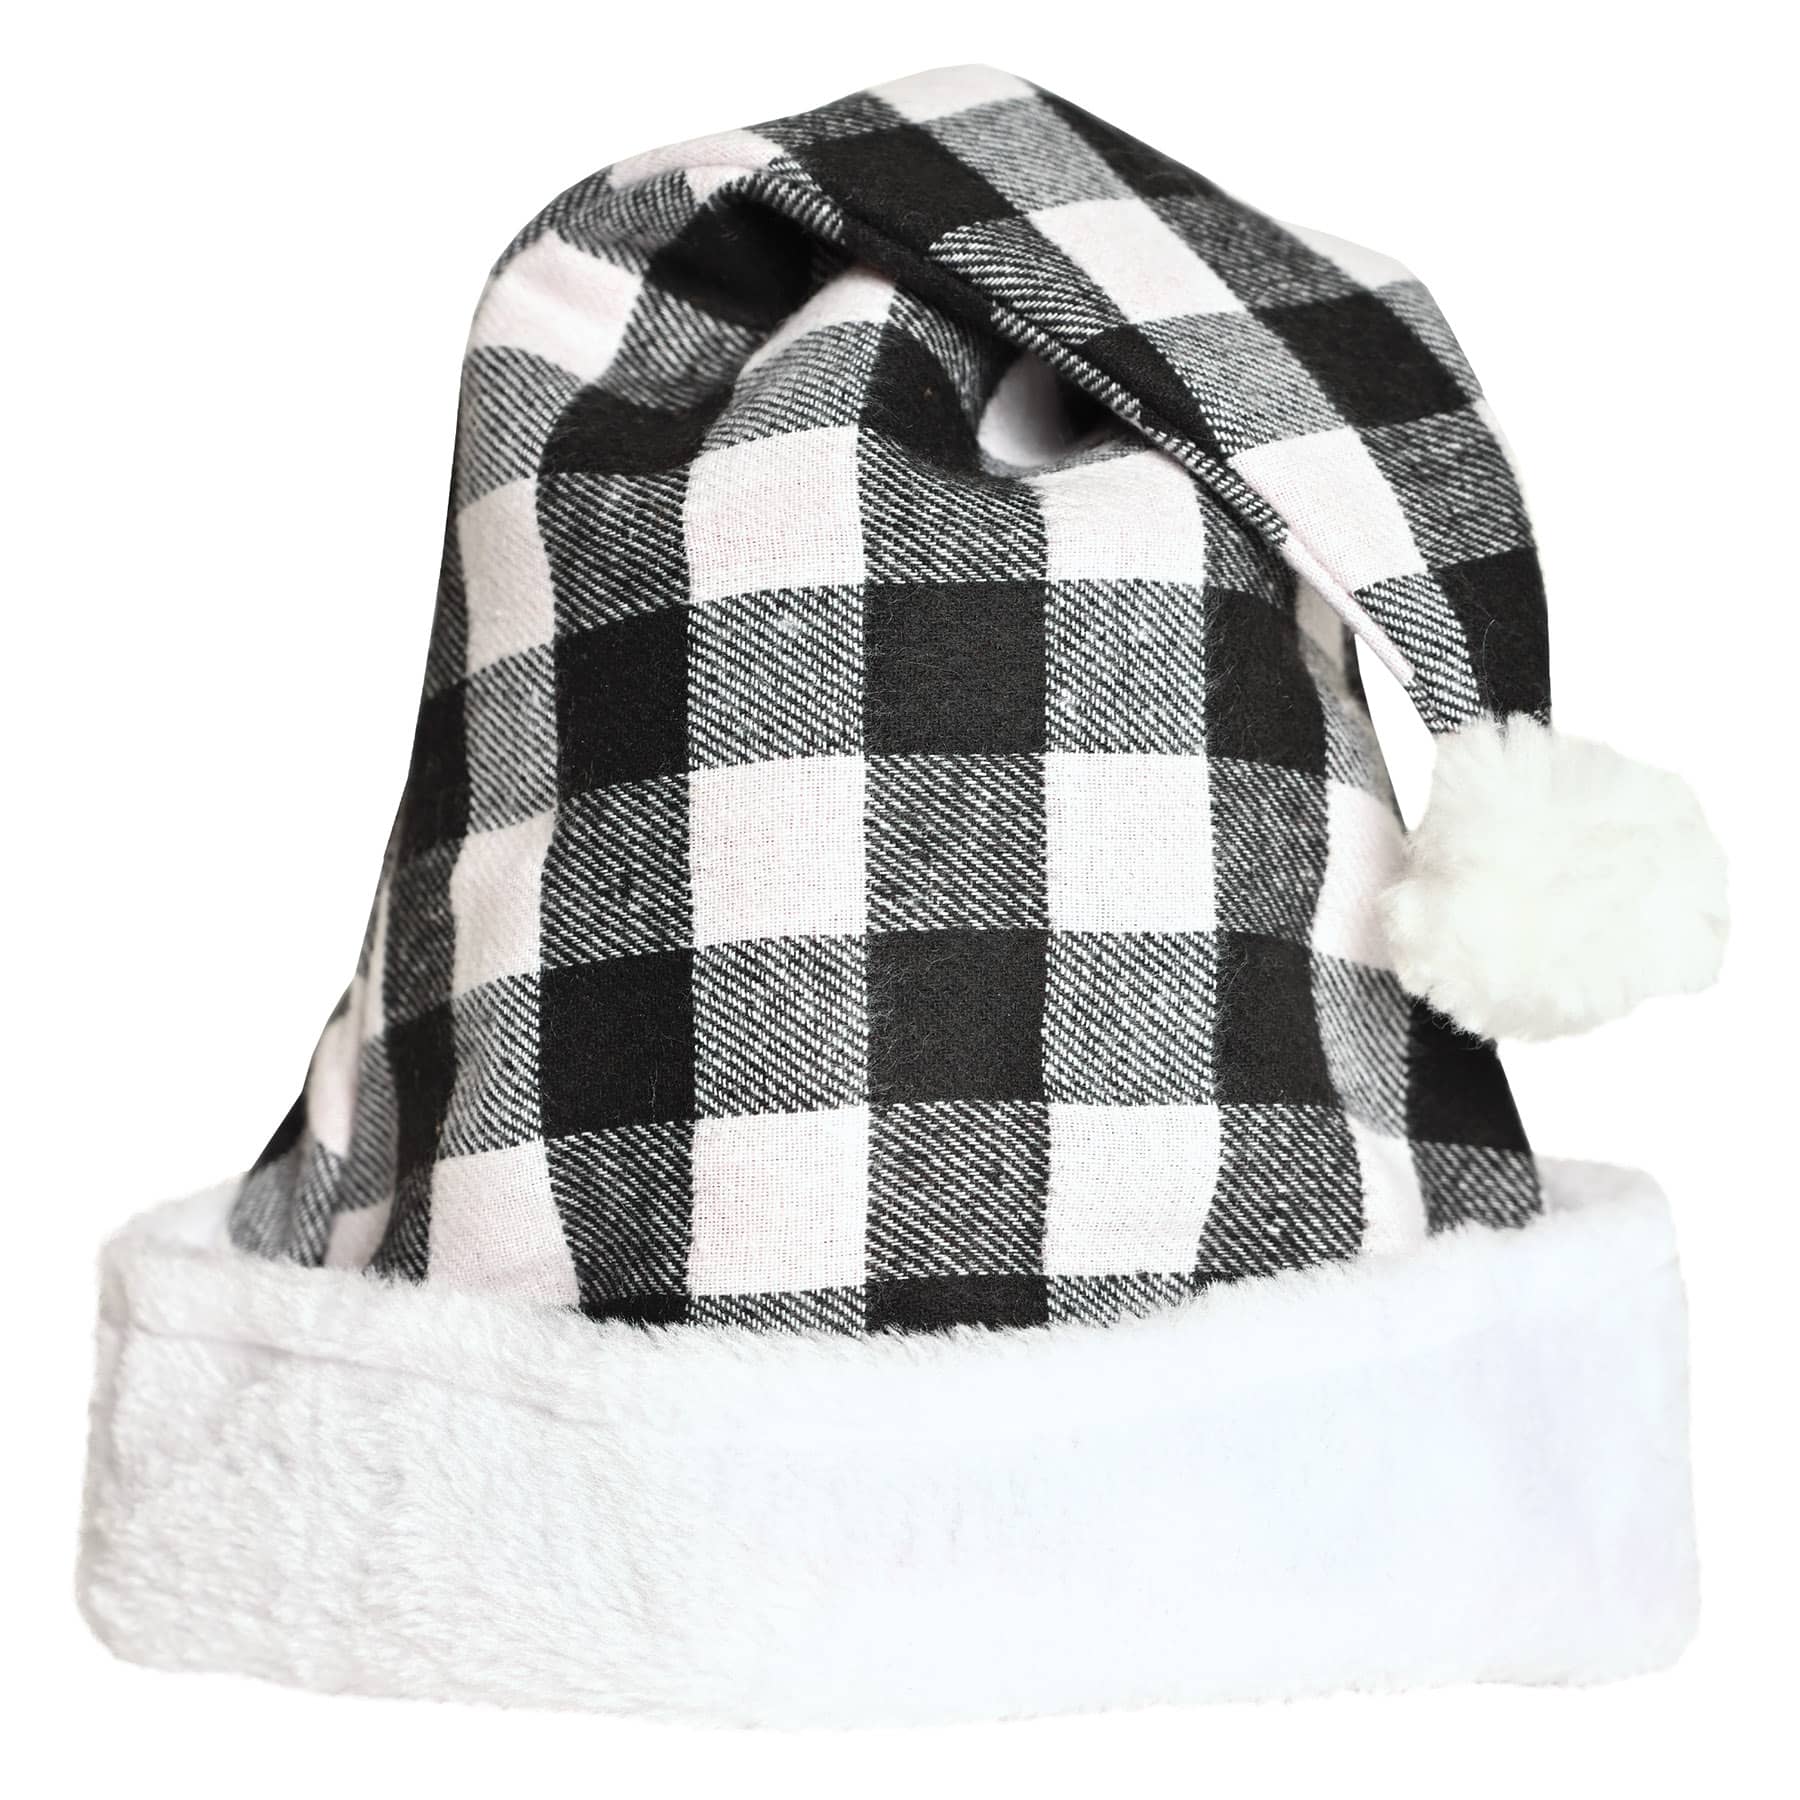 A traditional Santa hat made of felt white and black plaid material with white plush trim.